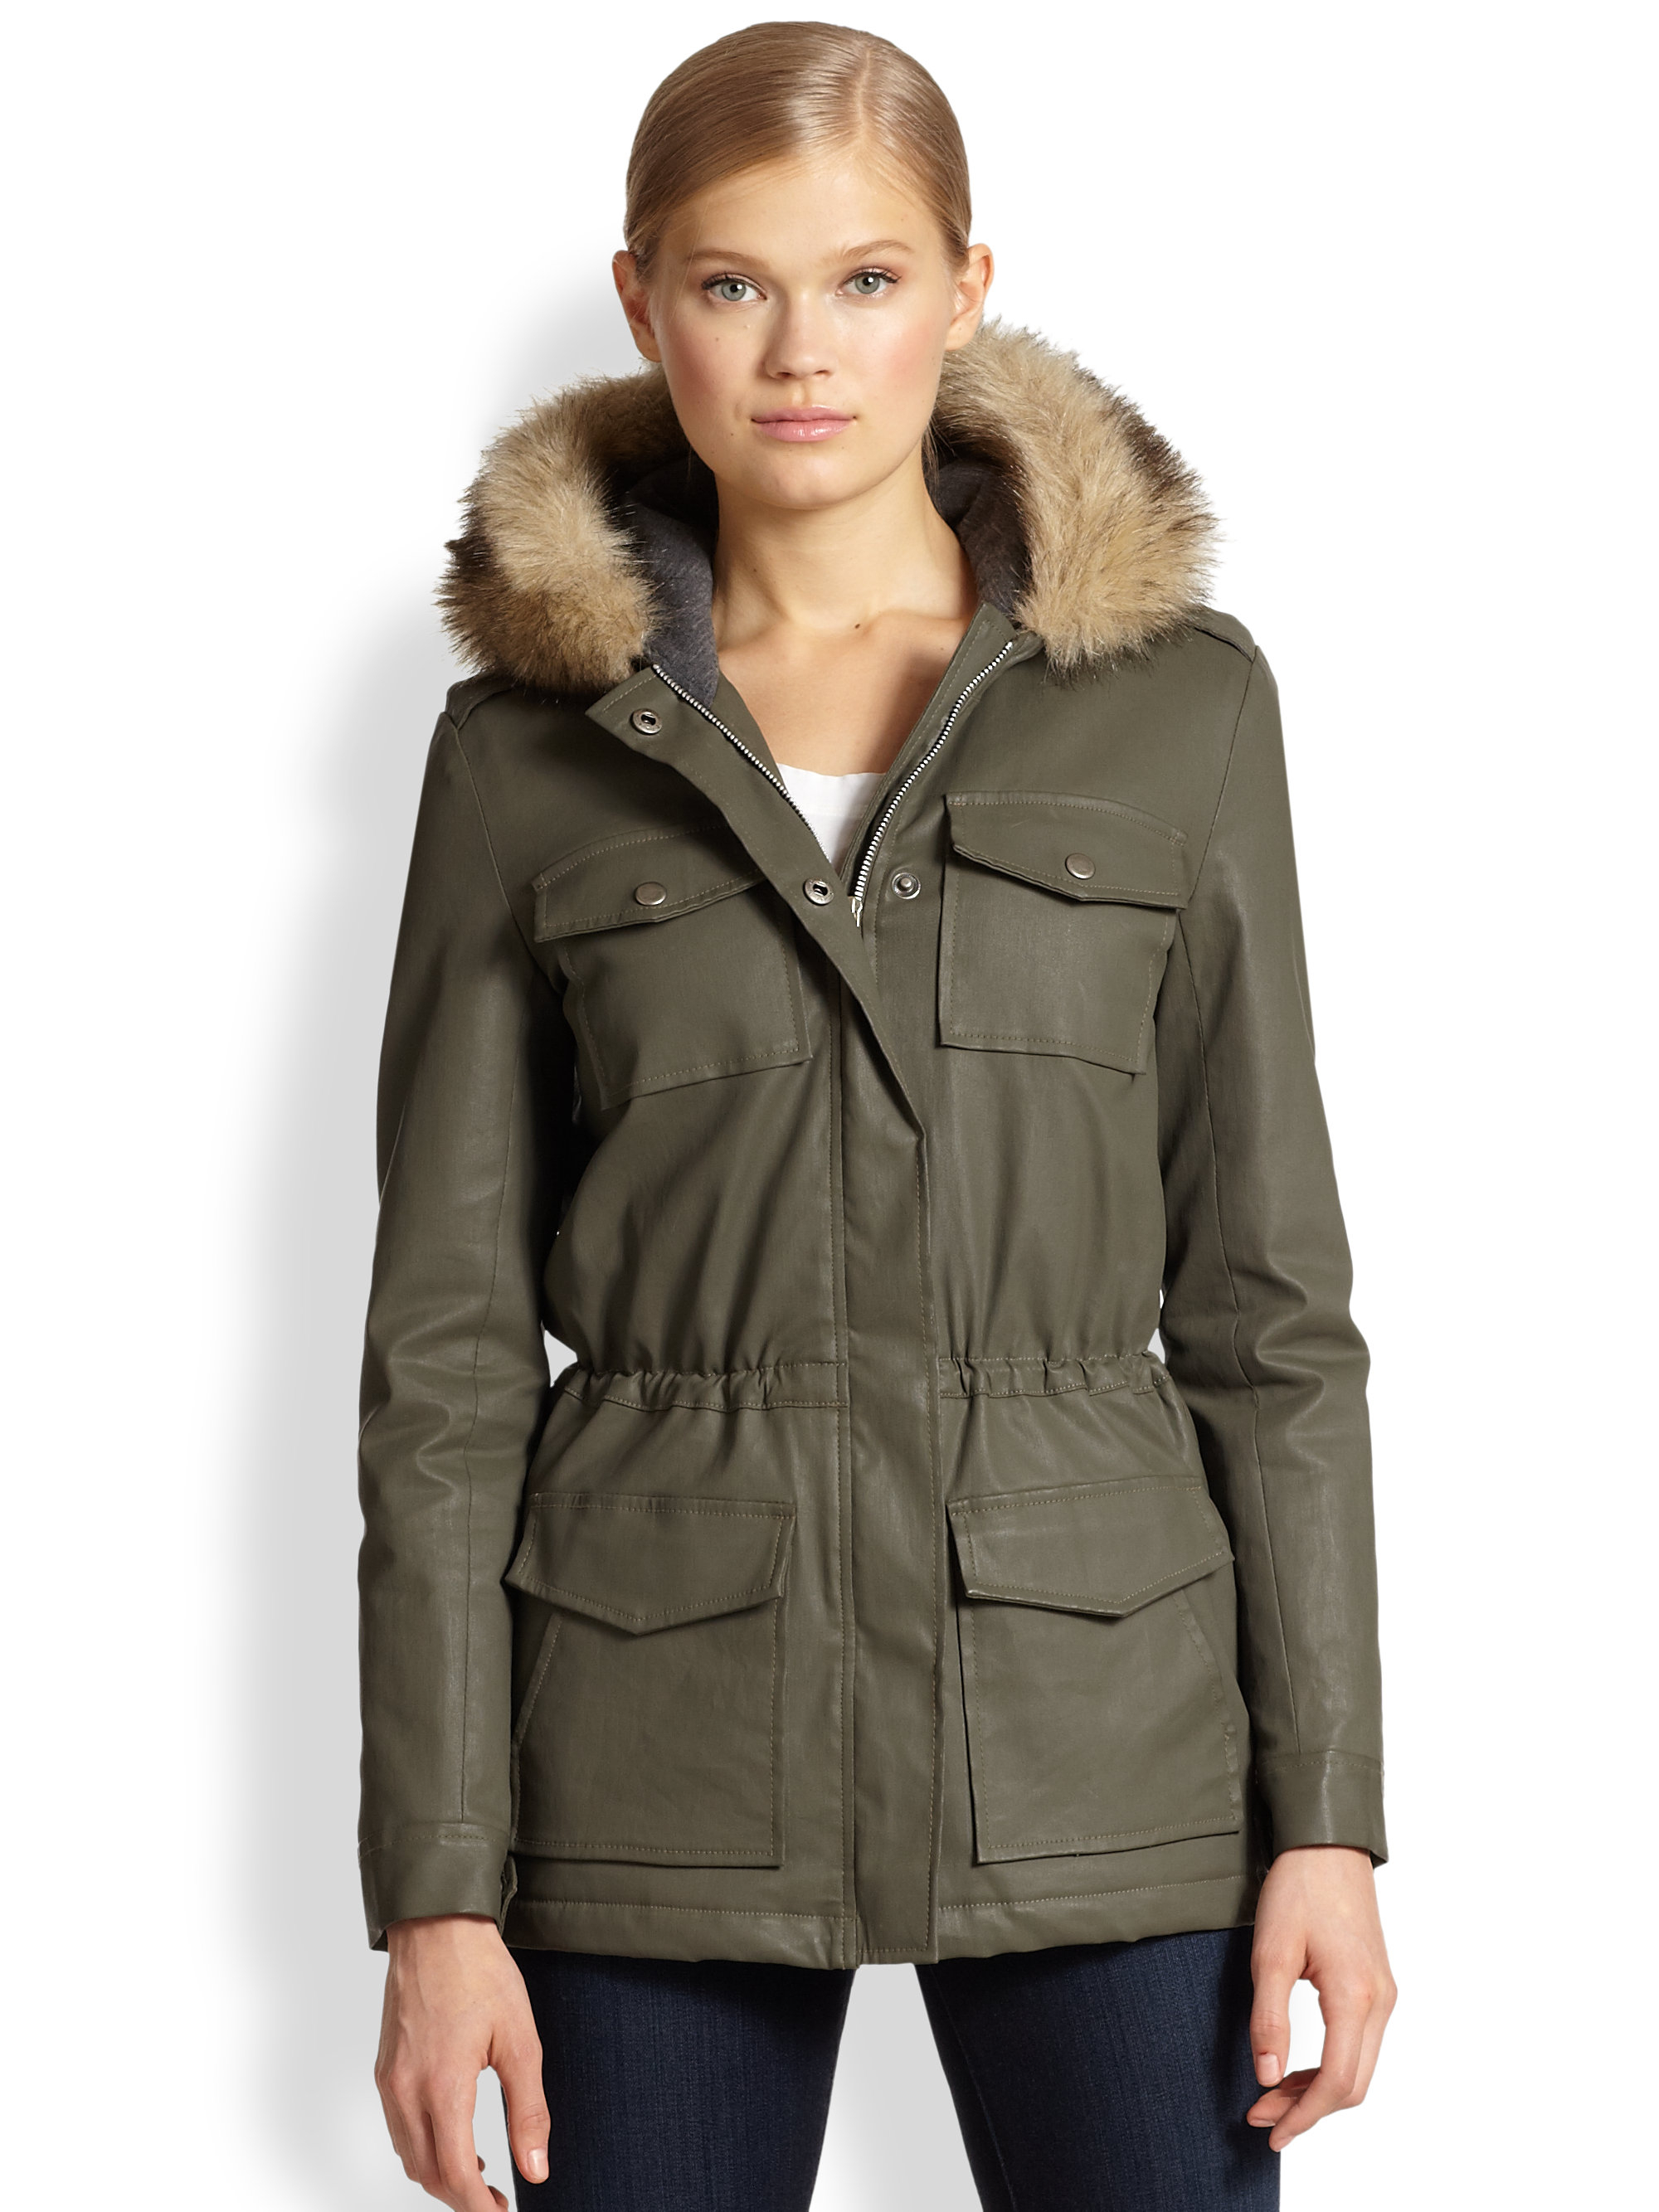 Lyst - Joie Faux Fur-Trimmed Coated Parka in Green